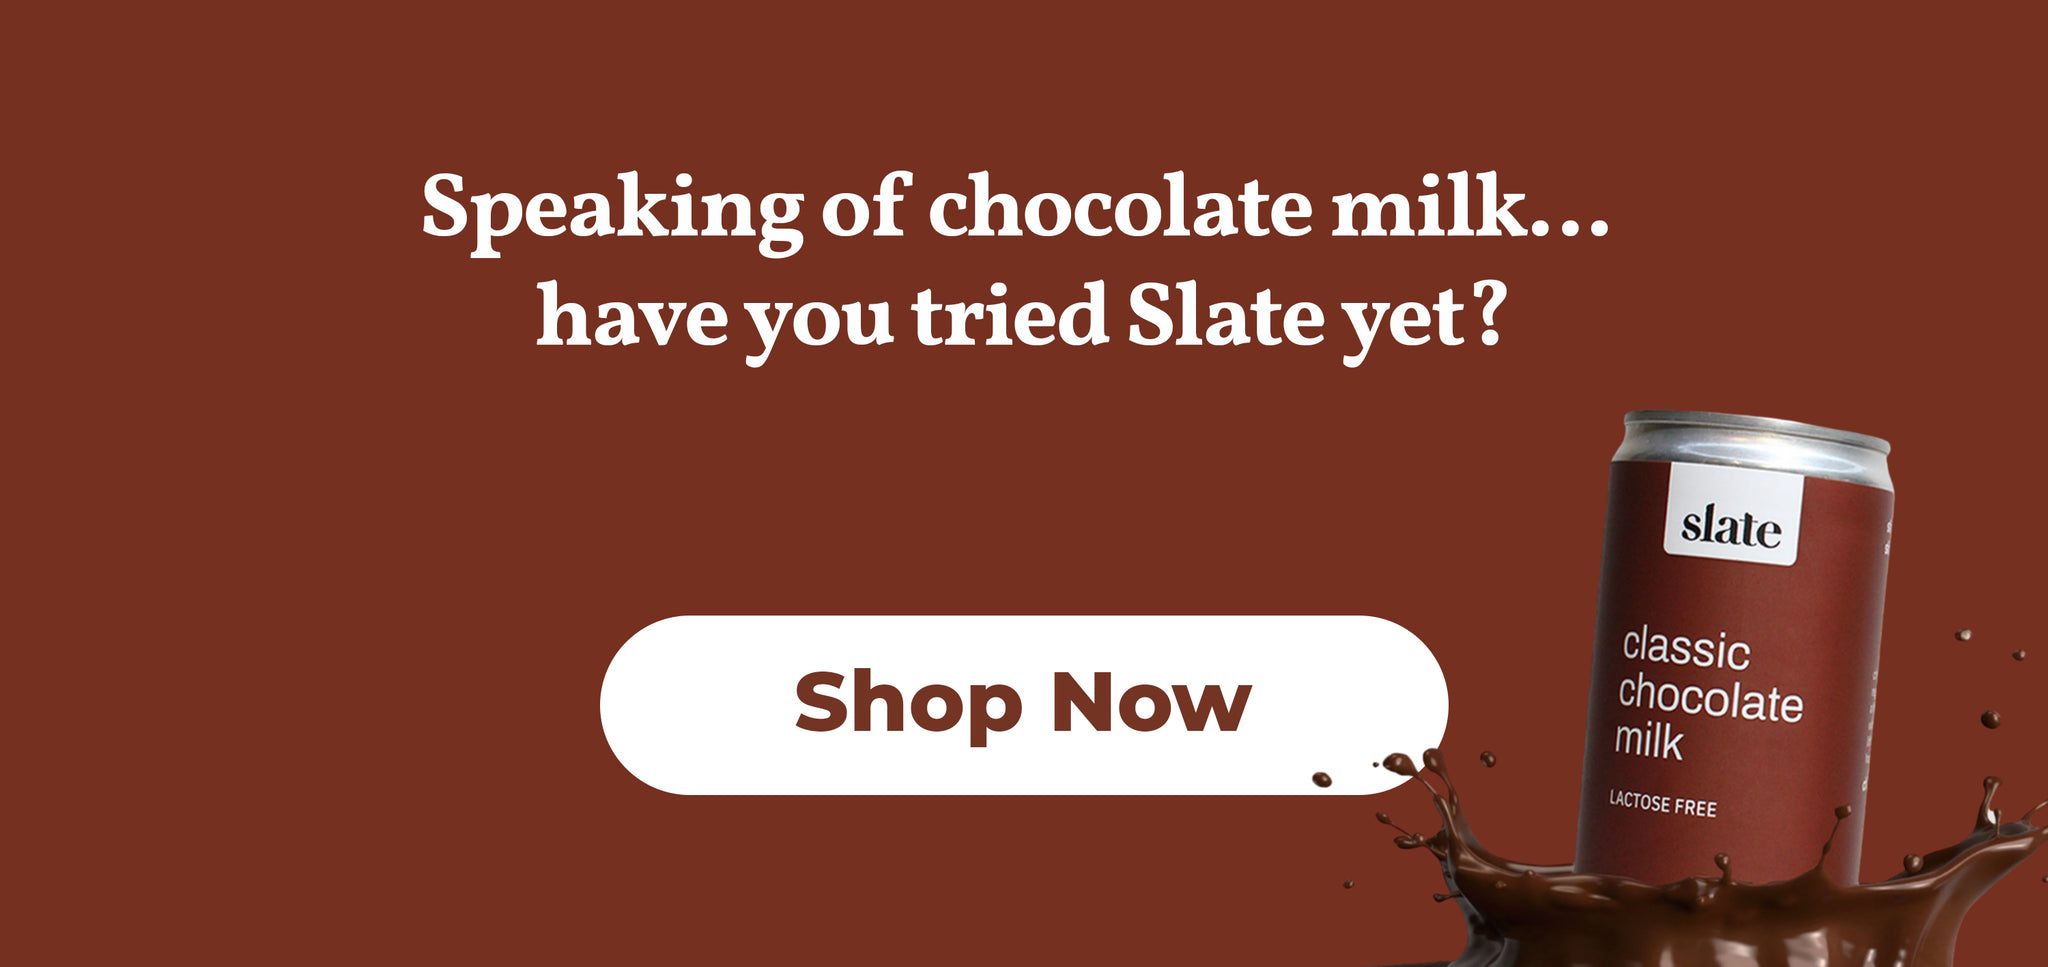 Do Adults Need A Different Kind of Chocolate Milk? Slate Thinks So -  Perishable News